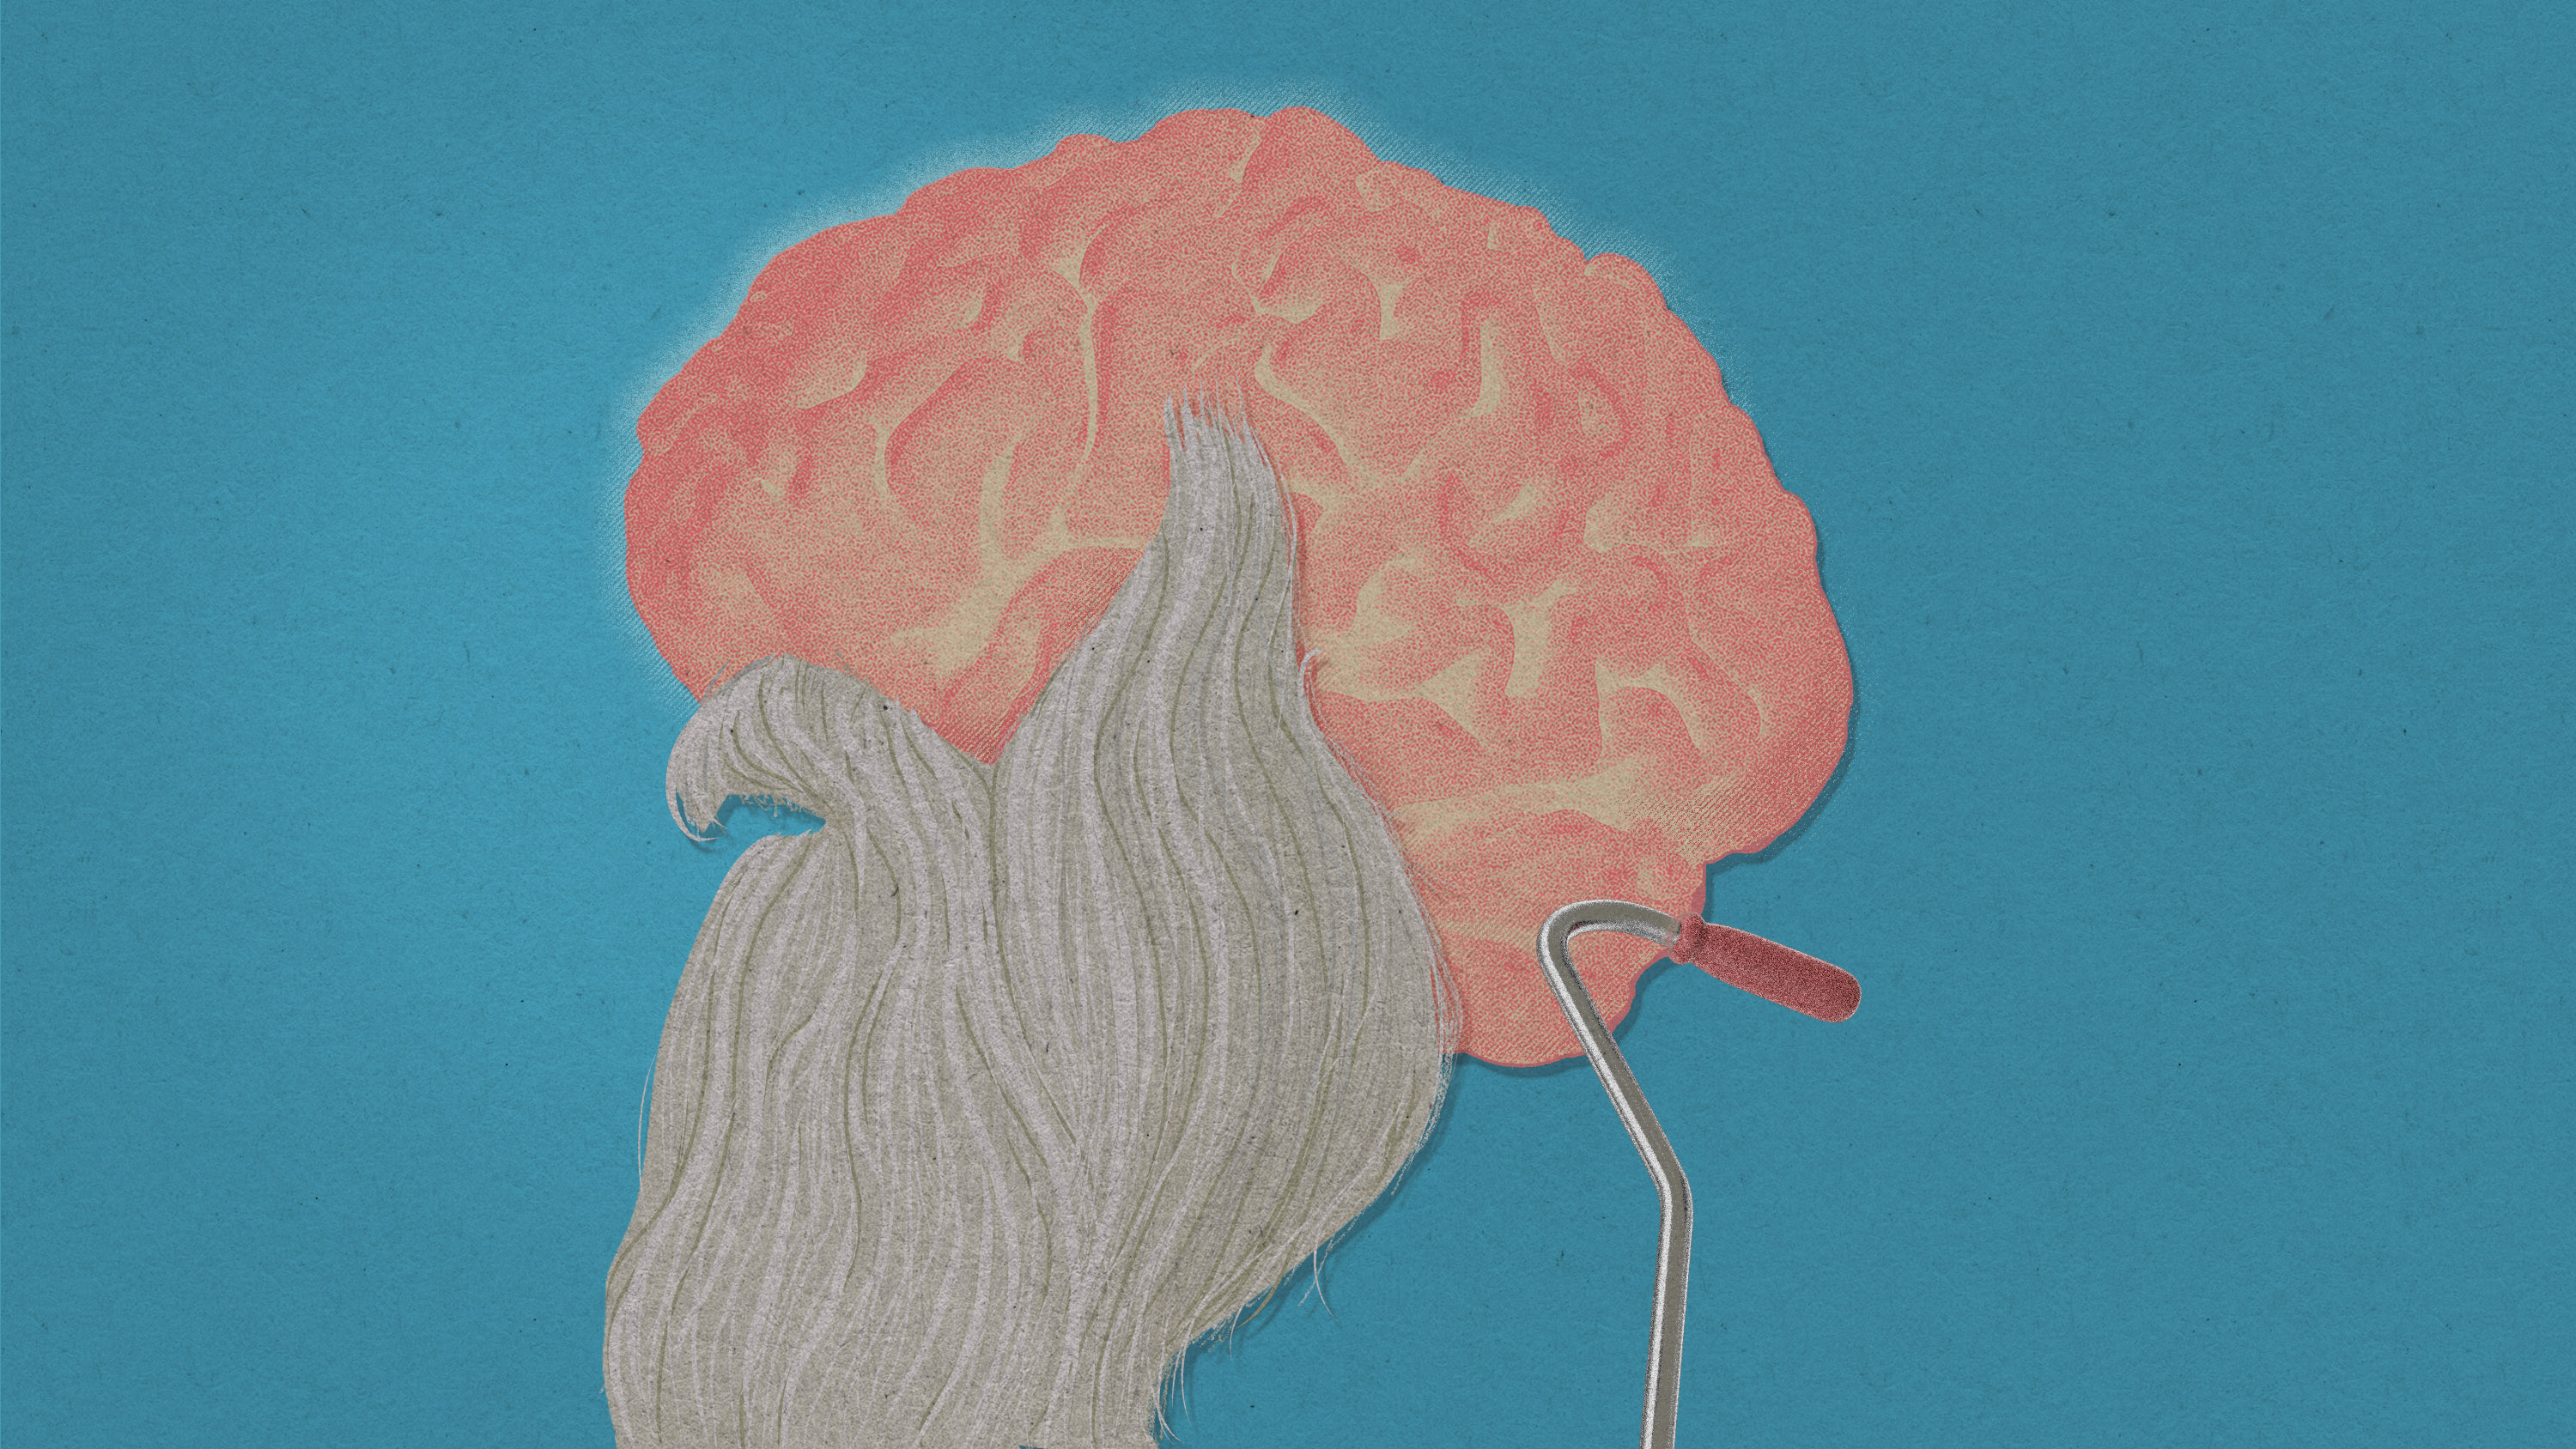 brain with a long grey beard and a cane